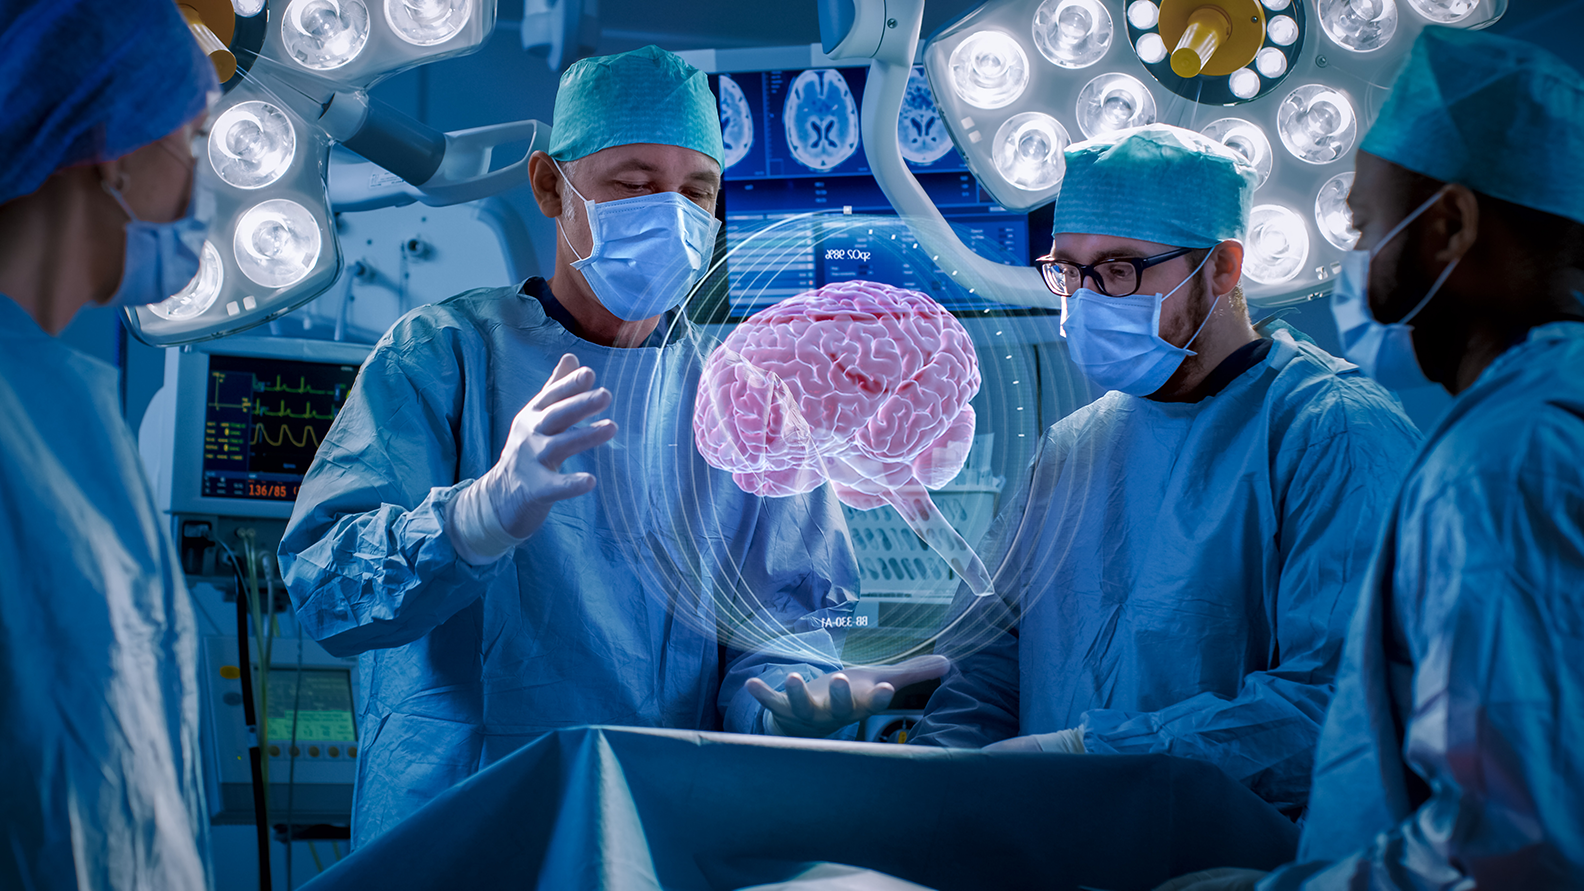 Surgeons look at a digital hologram scan of a brain before they help a patient